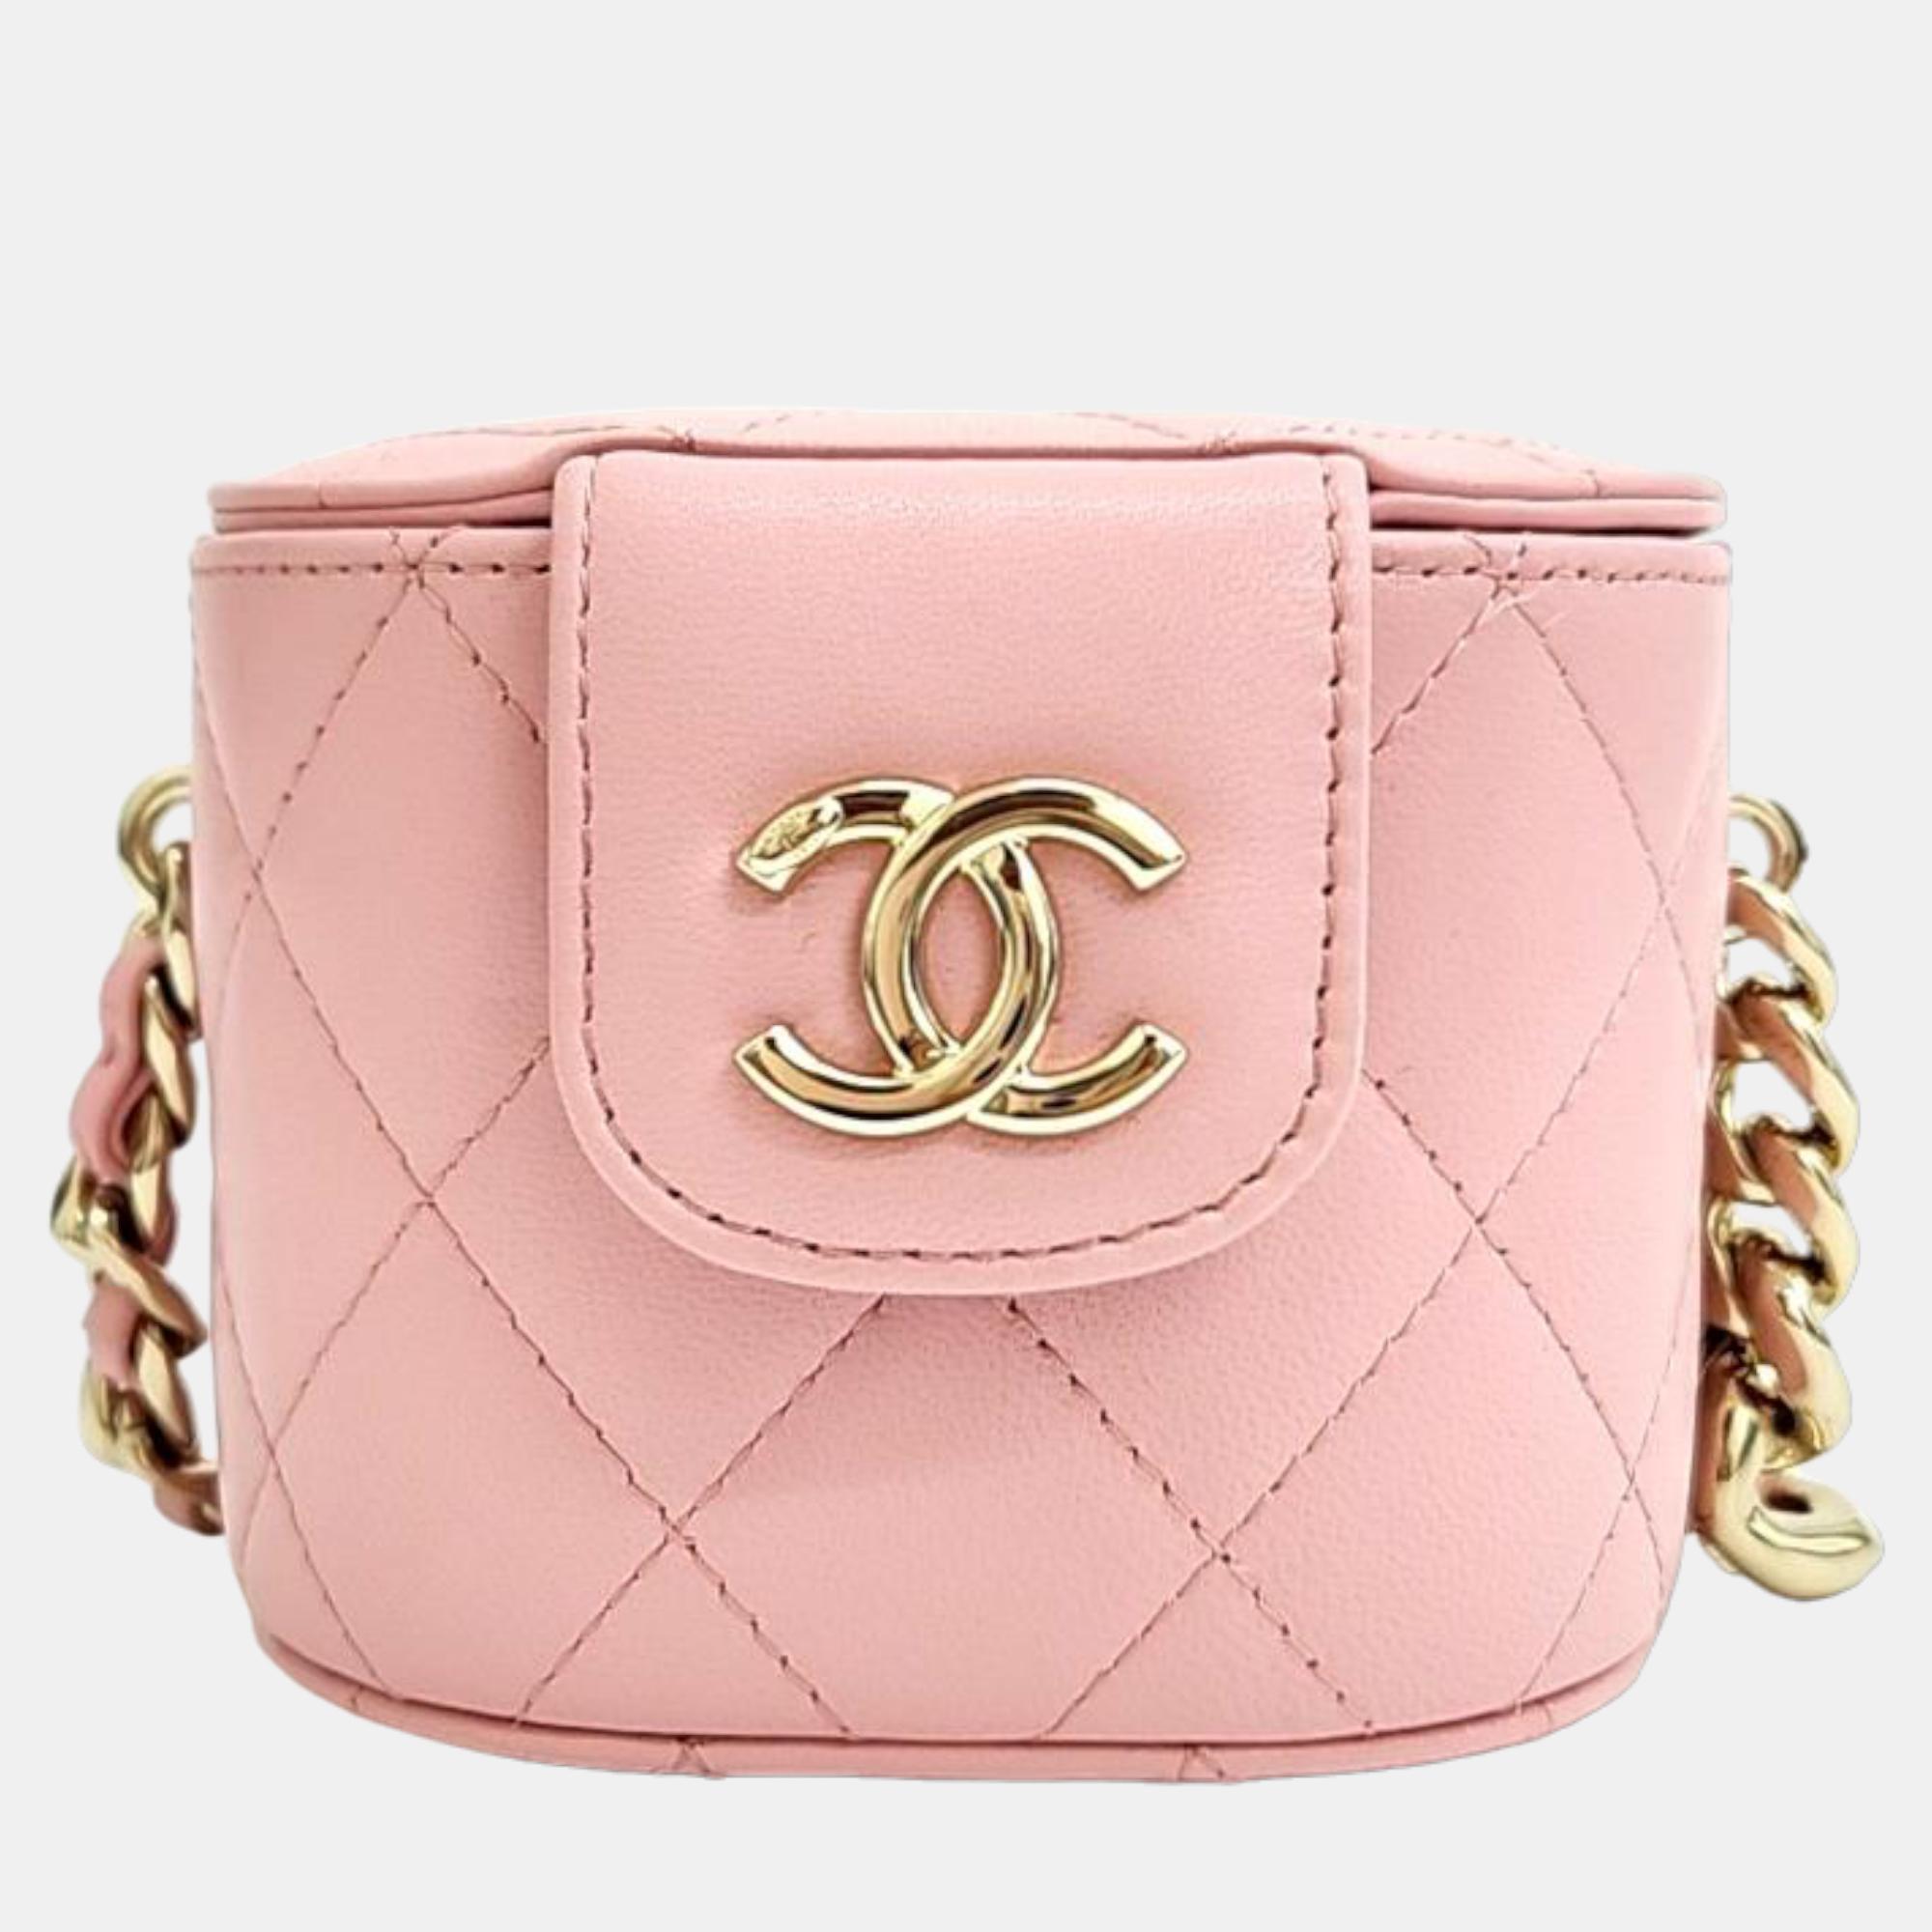 Chanel pink leather mini vanity case clutch bag